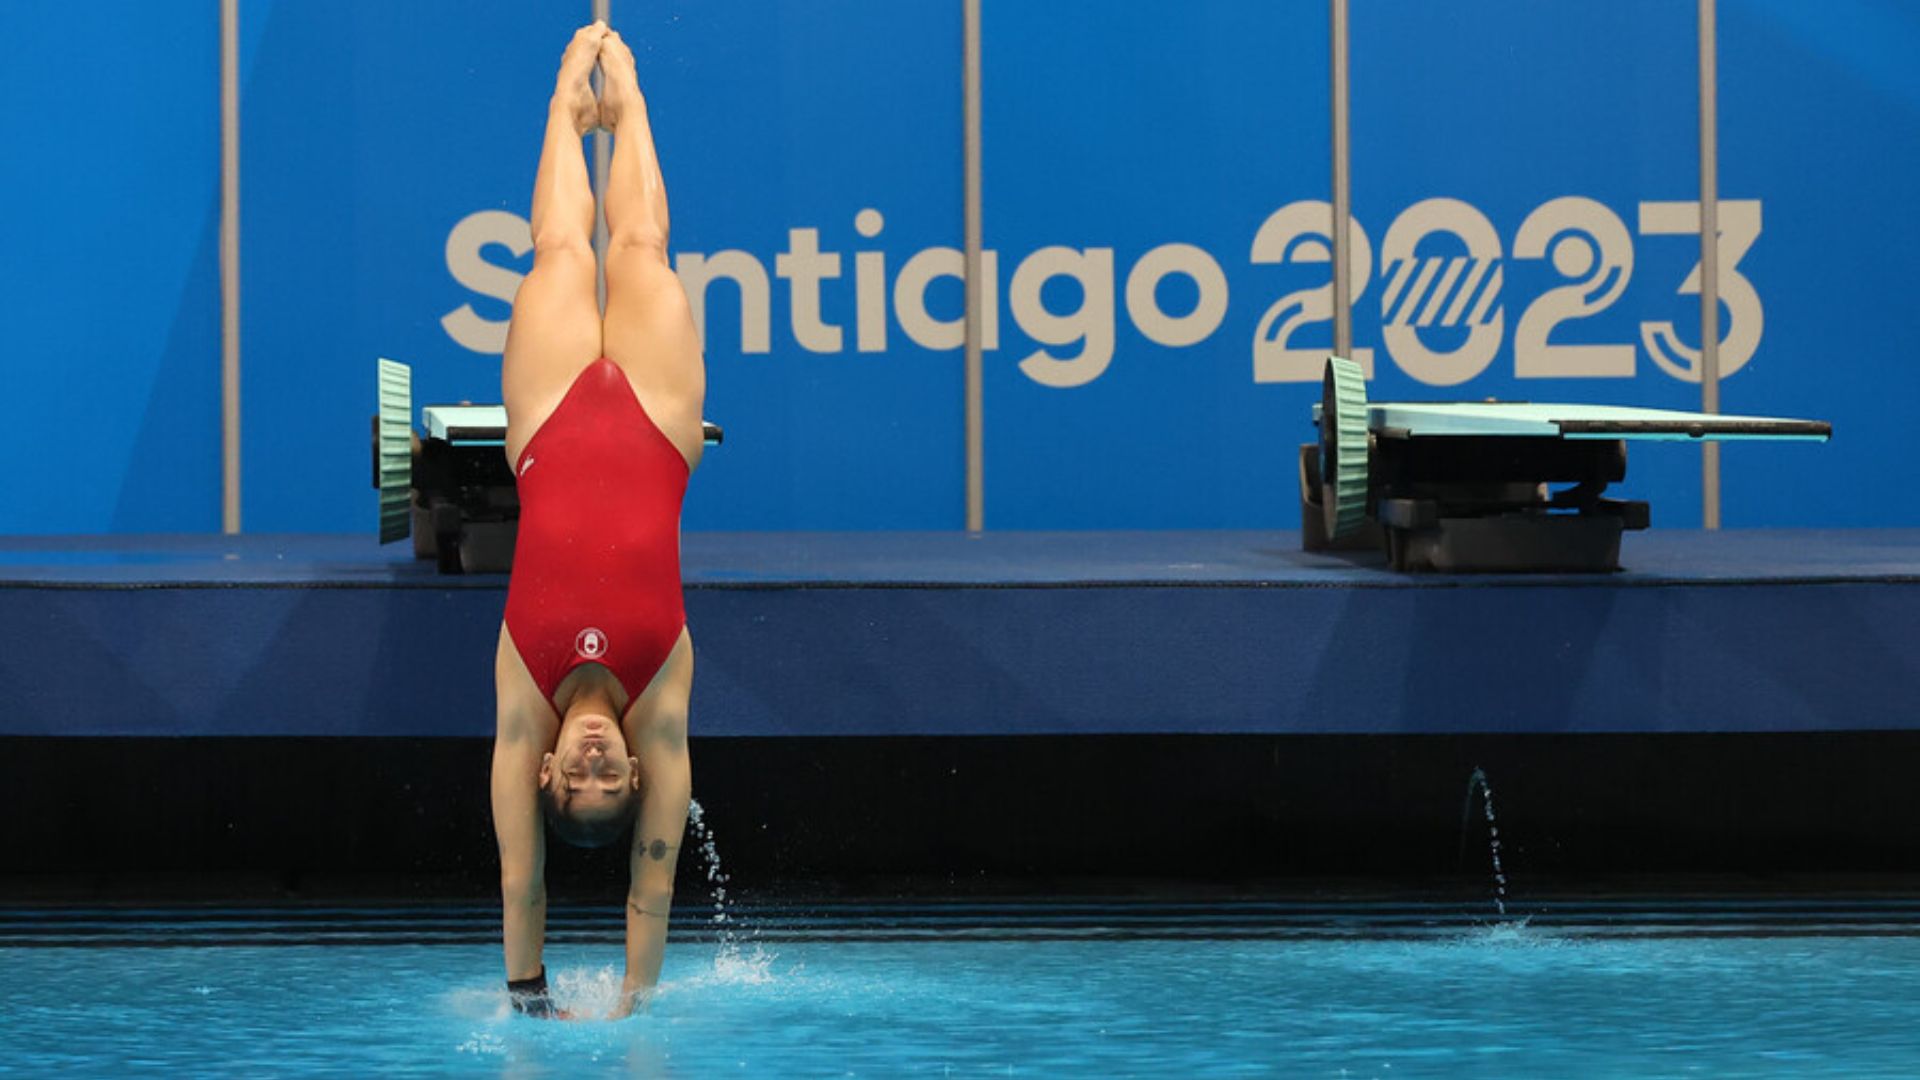 Diving brings joy to Mexico and Canada in Santiago 2023